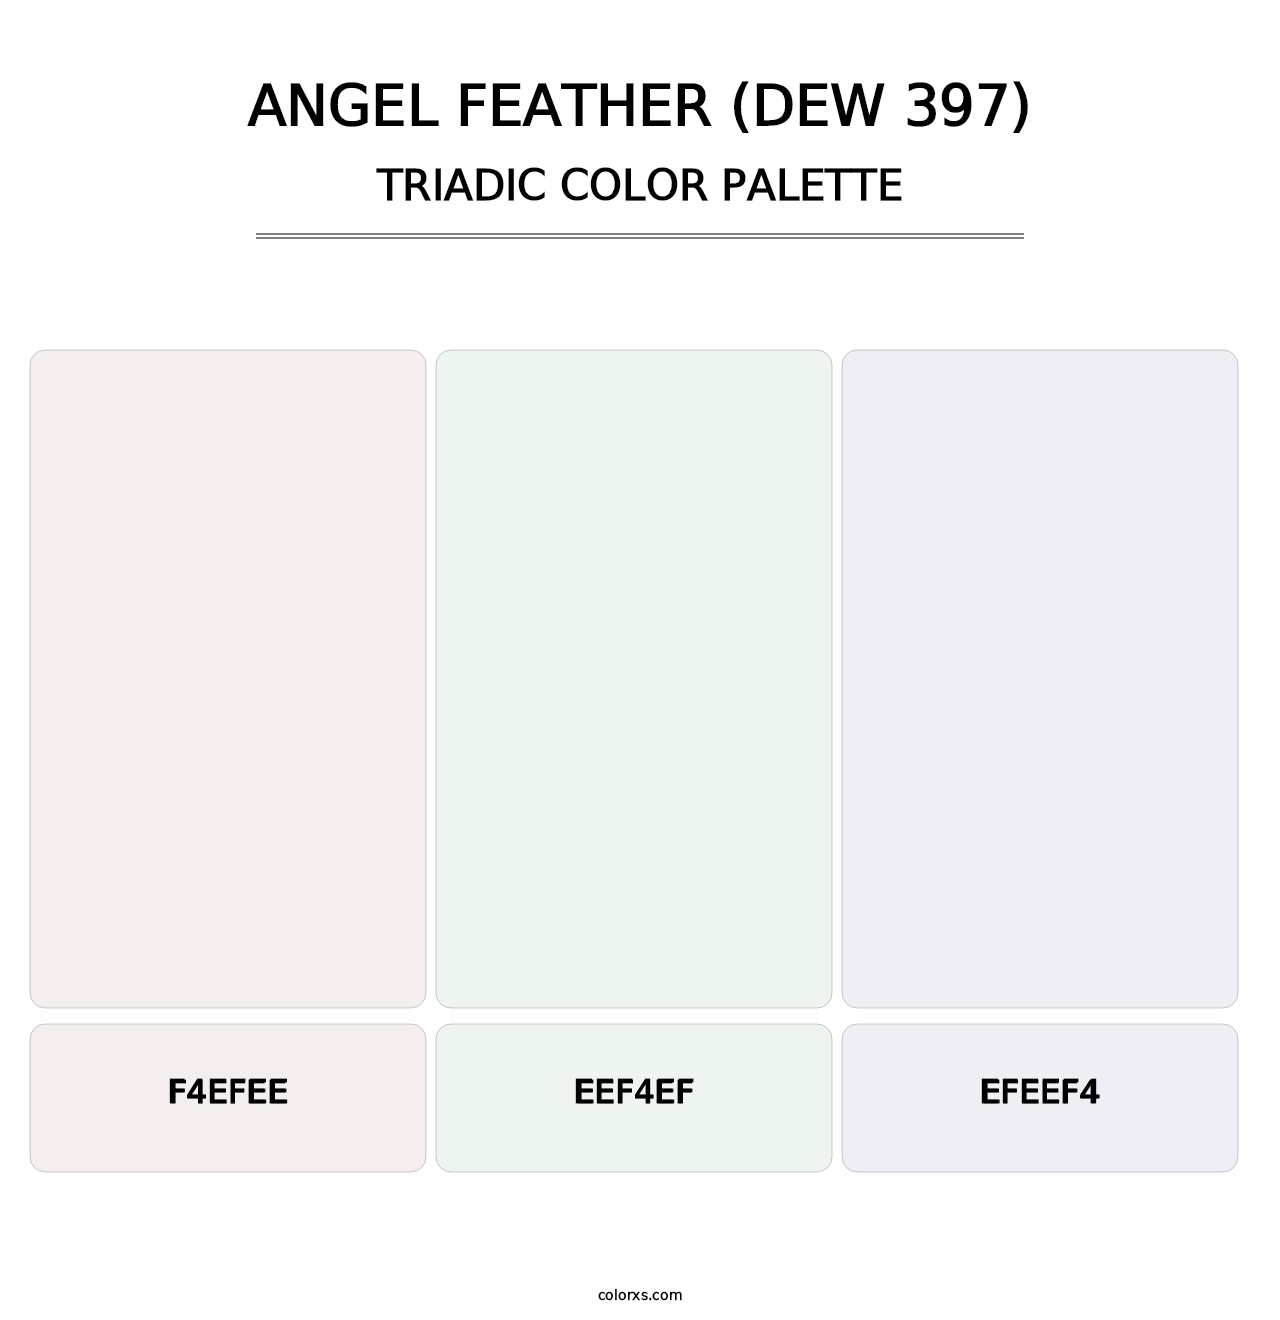 Angel Feather (DEW 397) - Triadic Color Palette